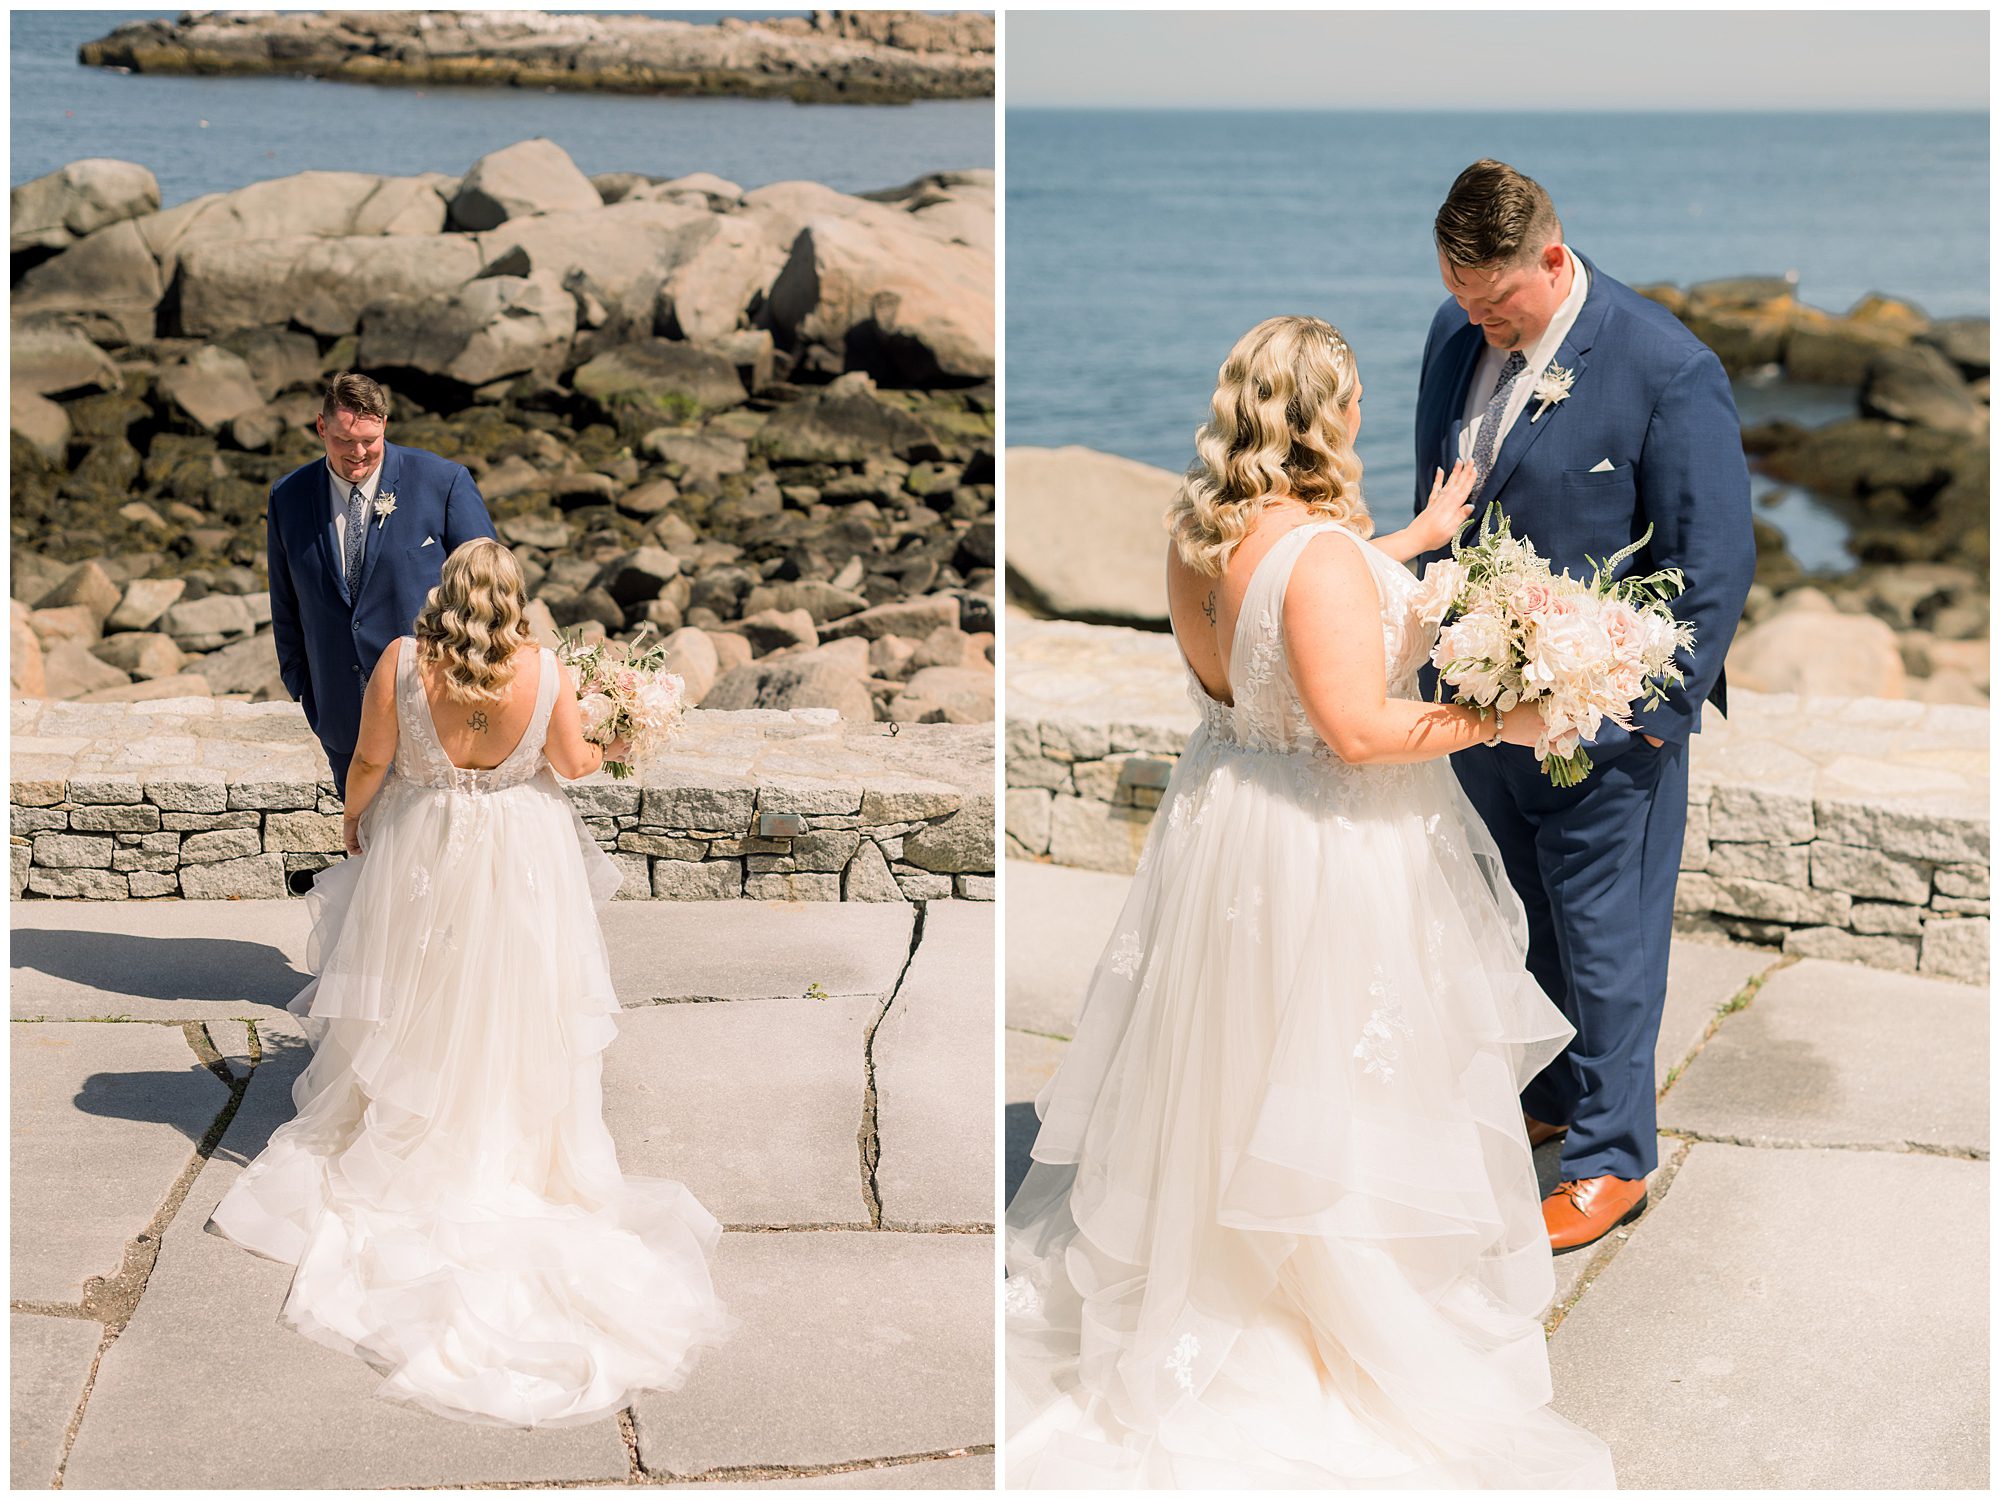 Wedding photography of Hailey & Michael overlooking the waterfront.